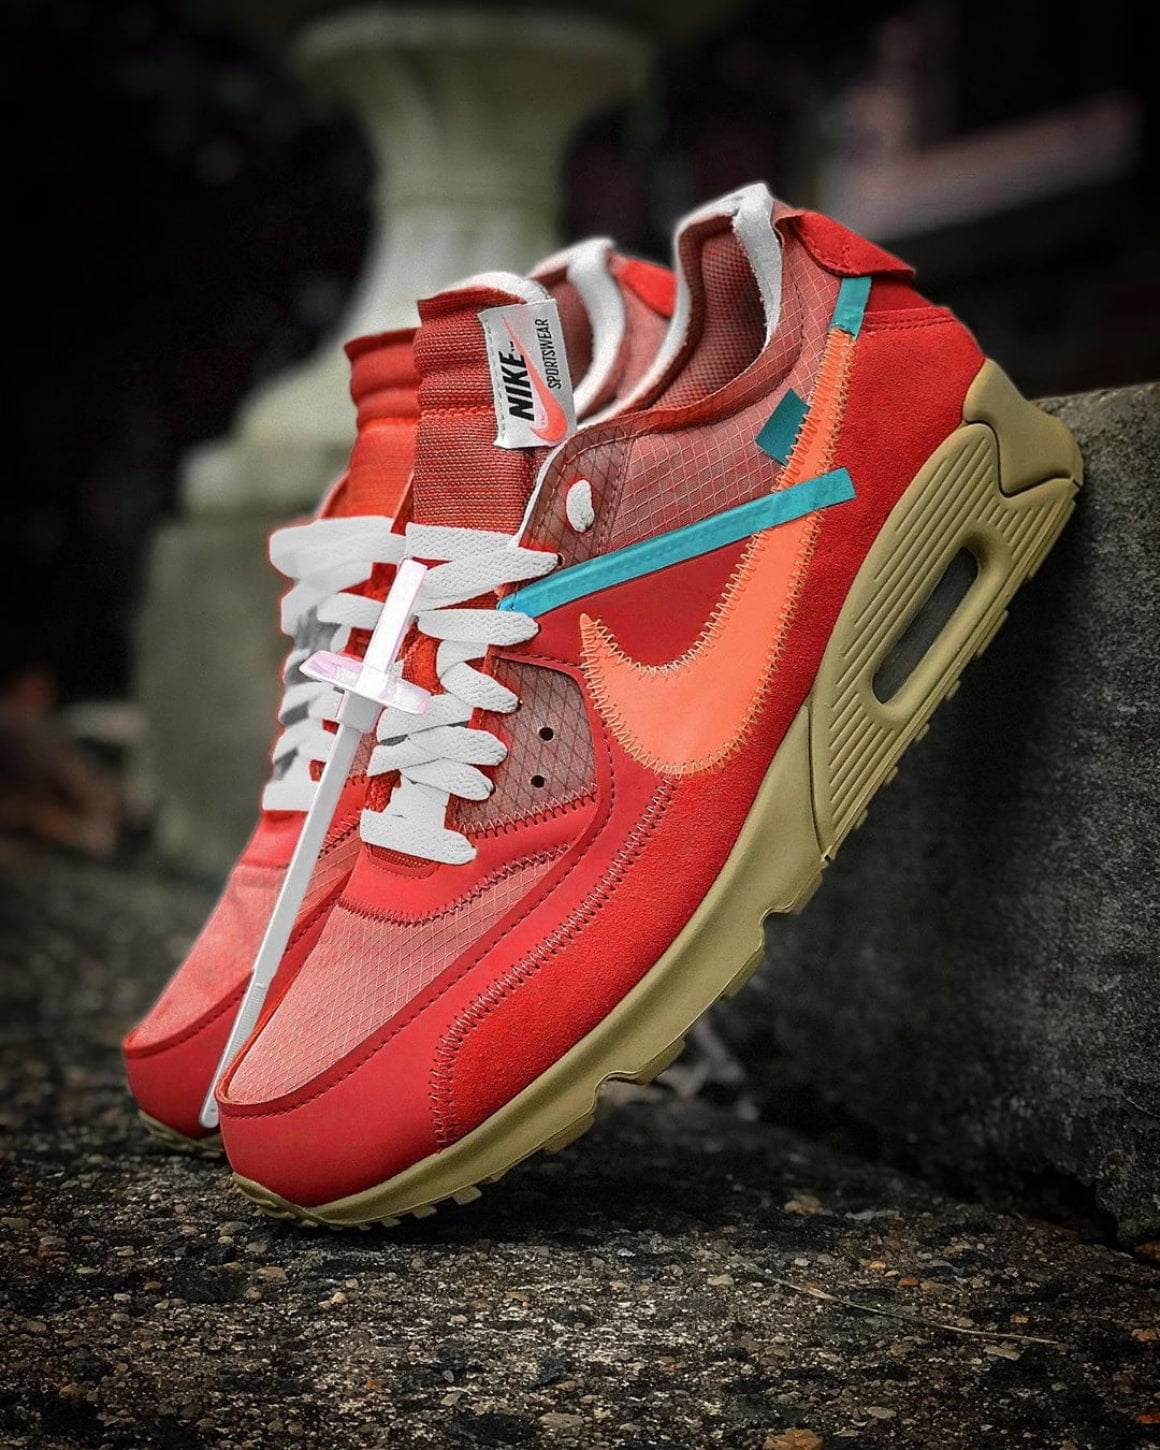 off white nike air max 90 where to buy